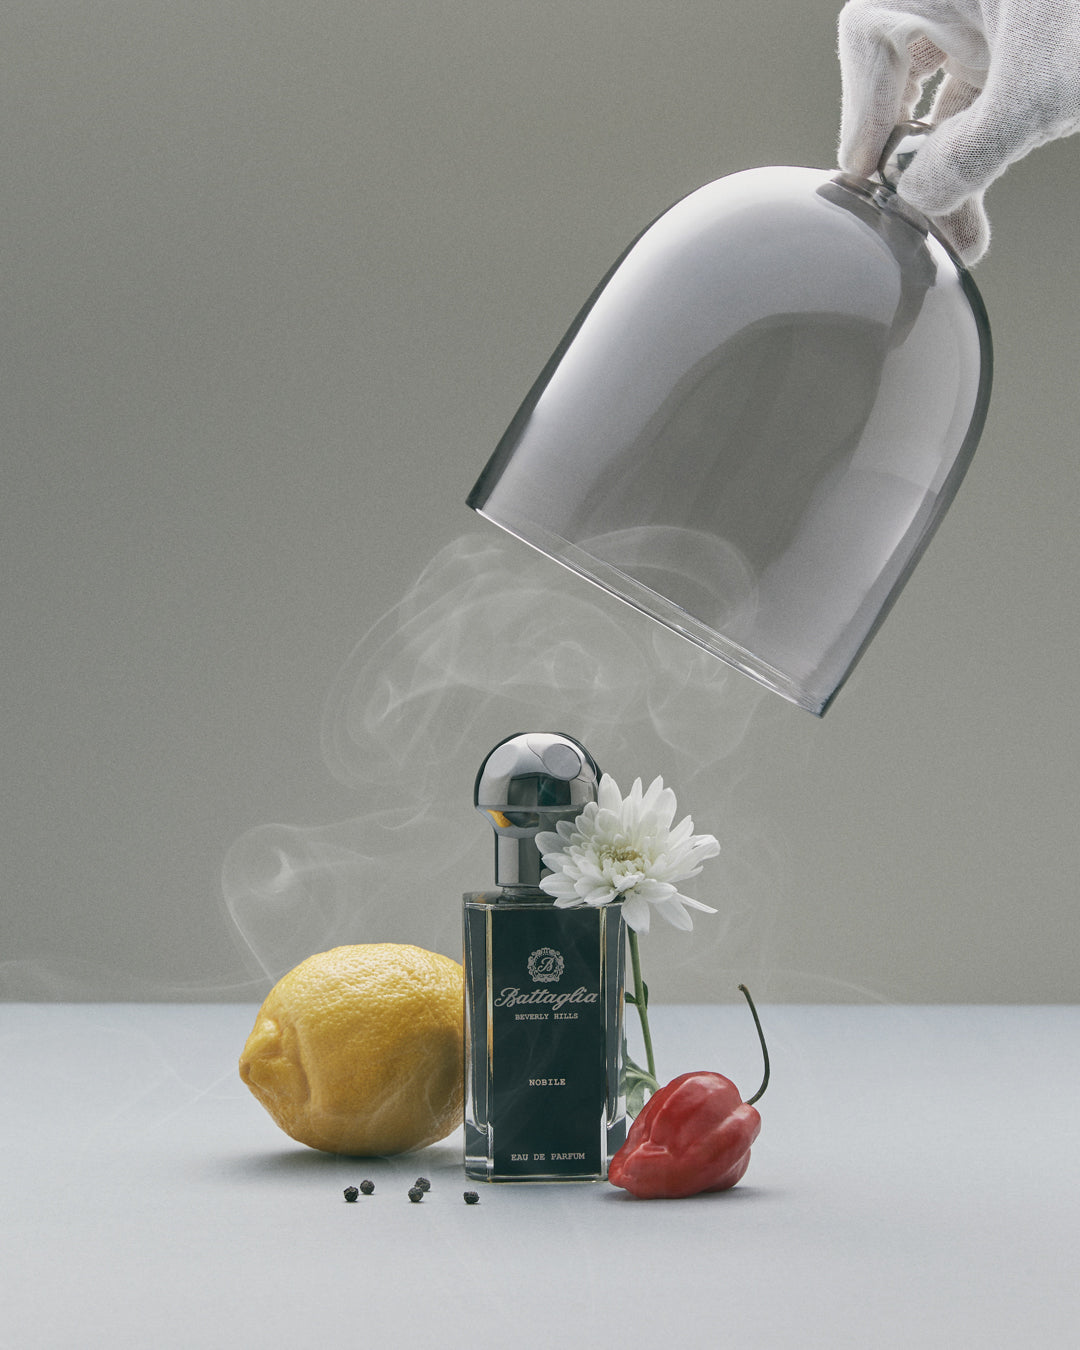 A bottle of Nobile fragrance surrounded by a lemon, pepper, white flower, and chili pepper with smoke and a glass cloche.